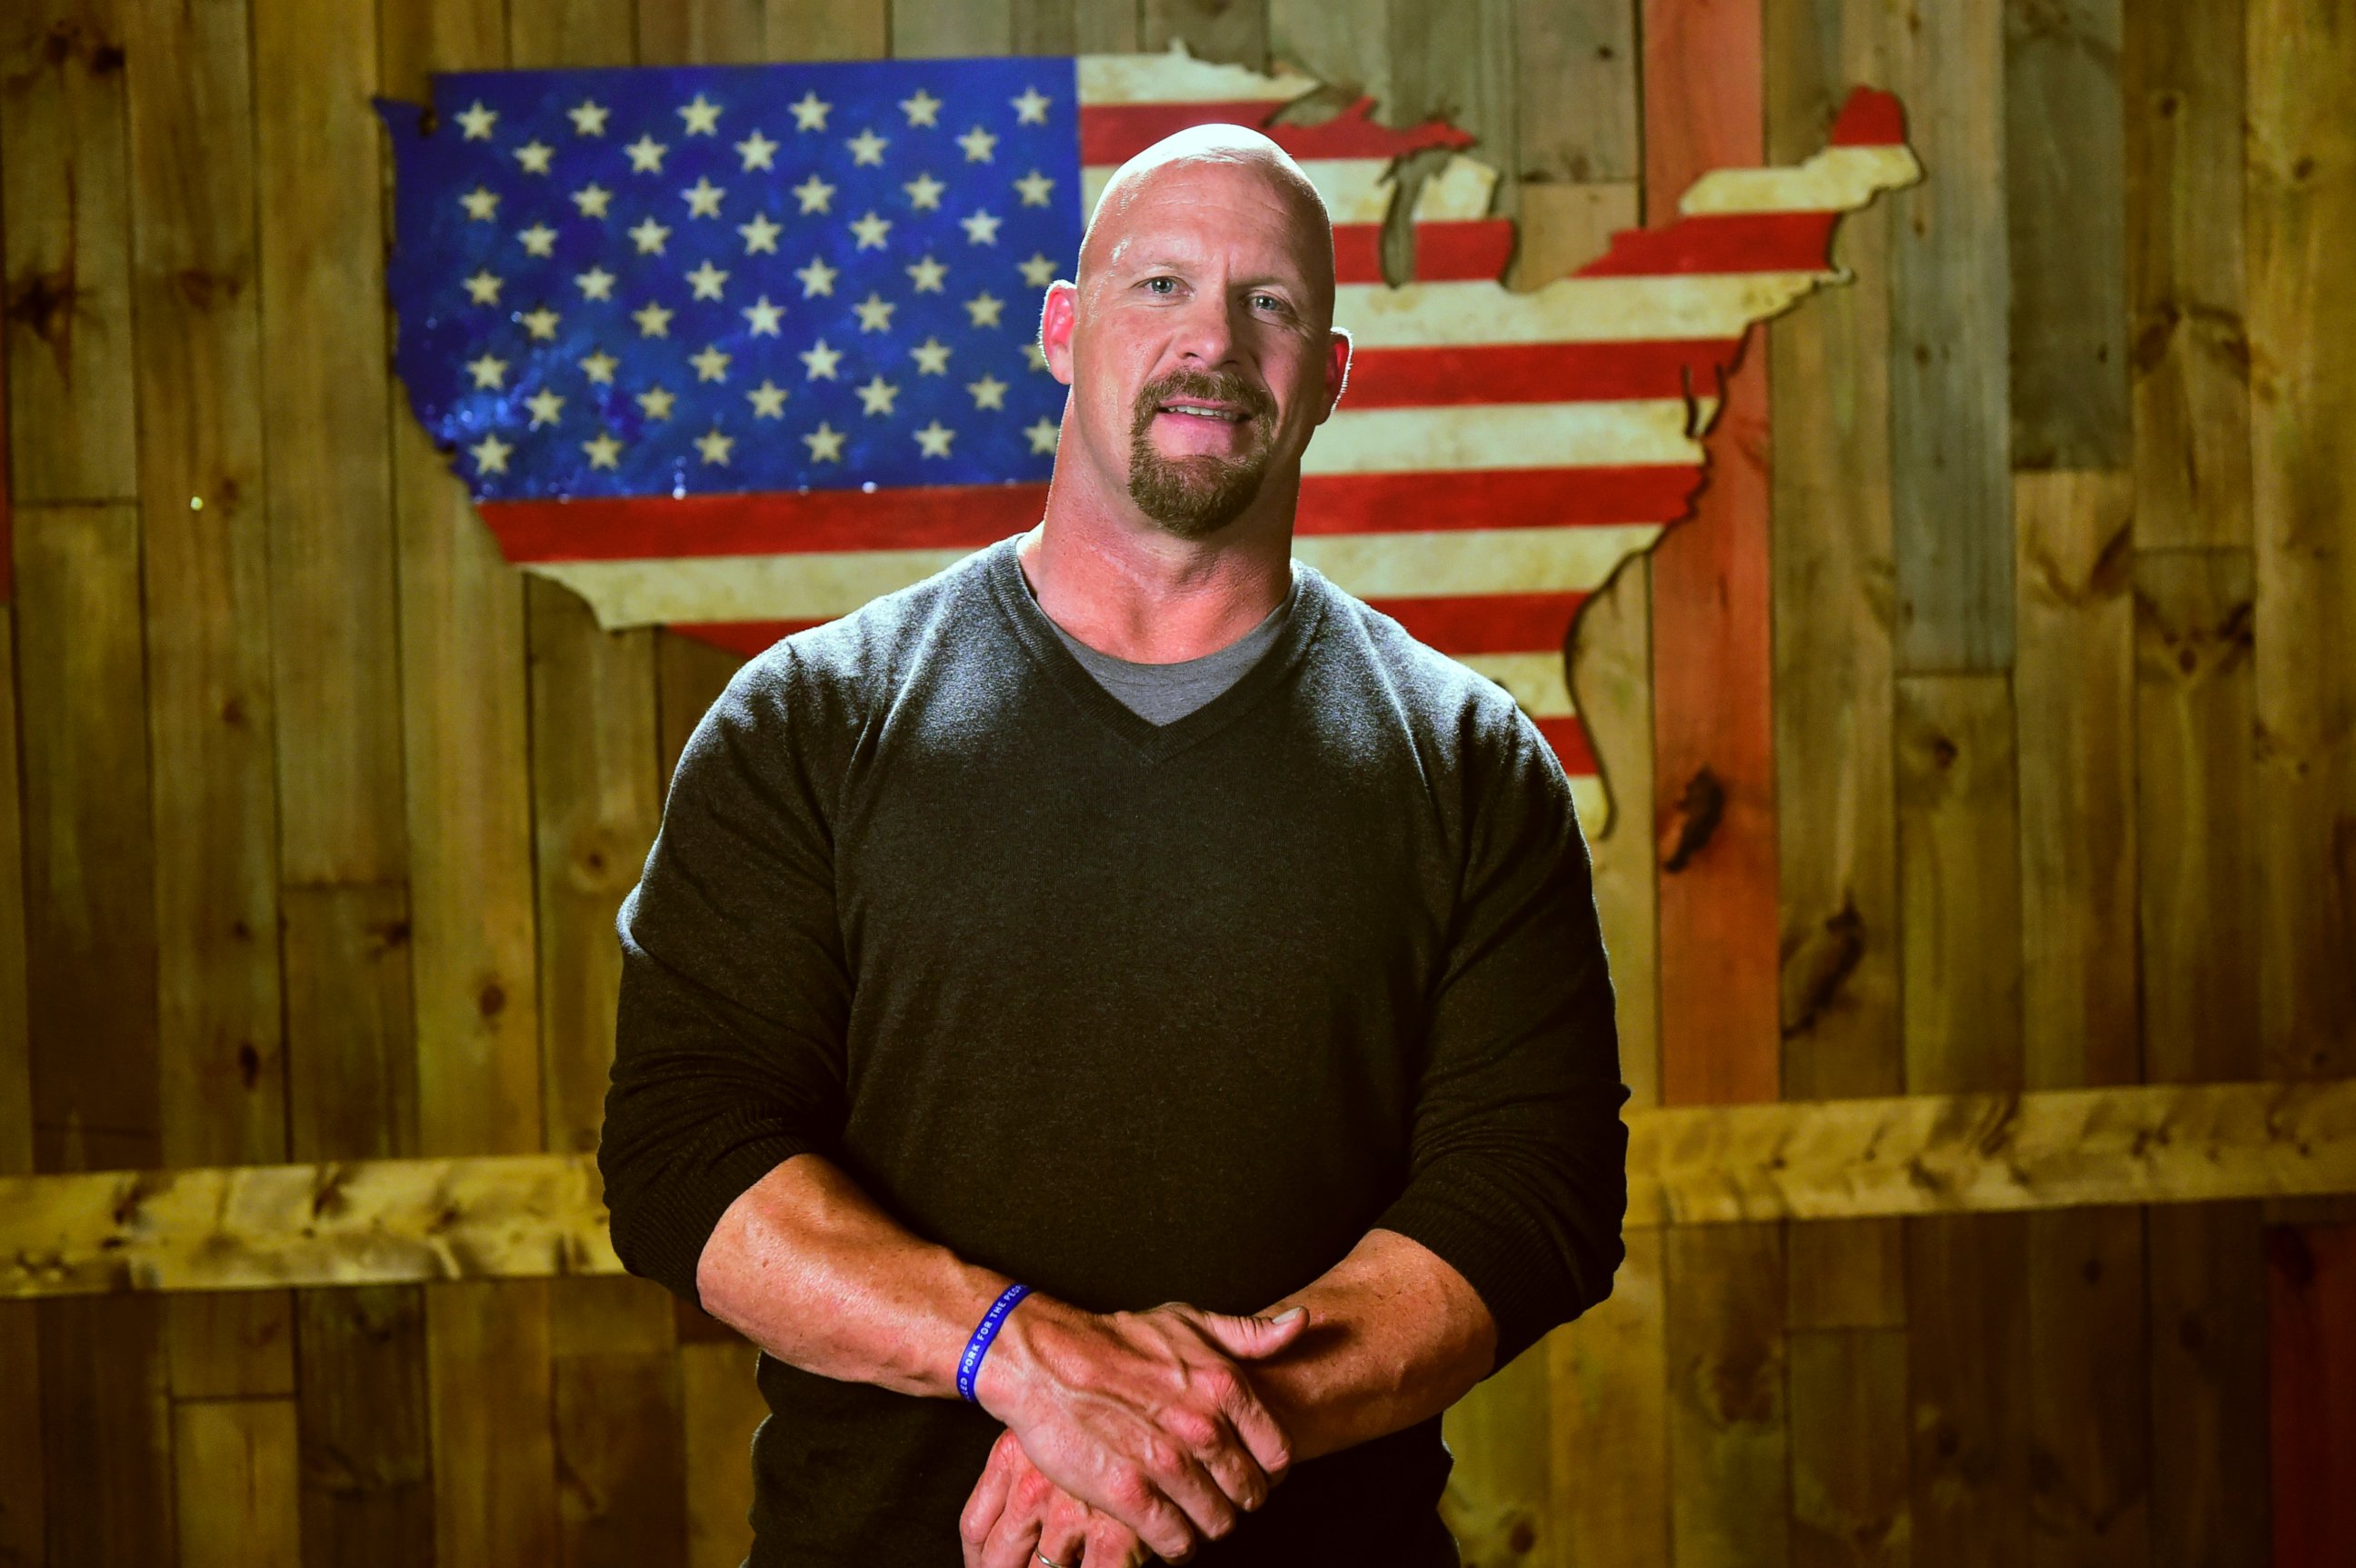 PHOTO: Steve Austin is pictured during filming for a commercial in Atlanta, Ga. on Sept. 29, 2014.
